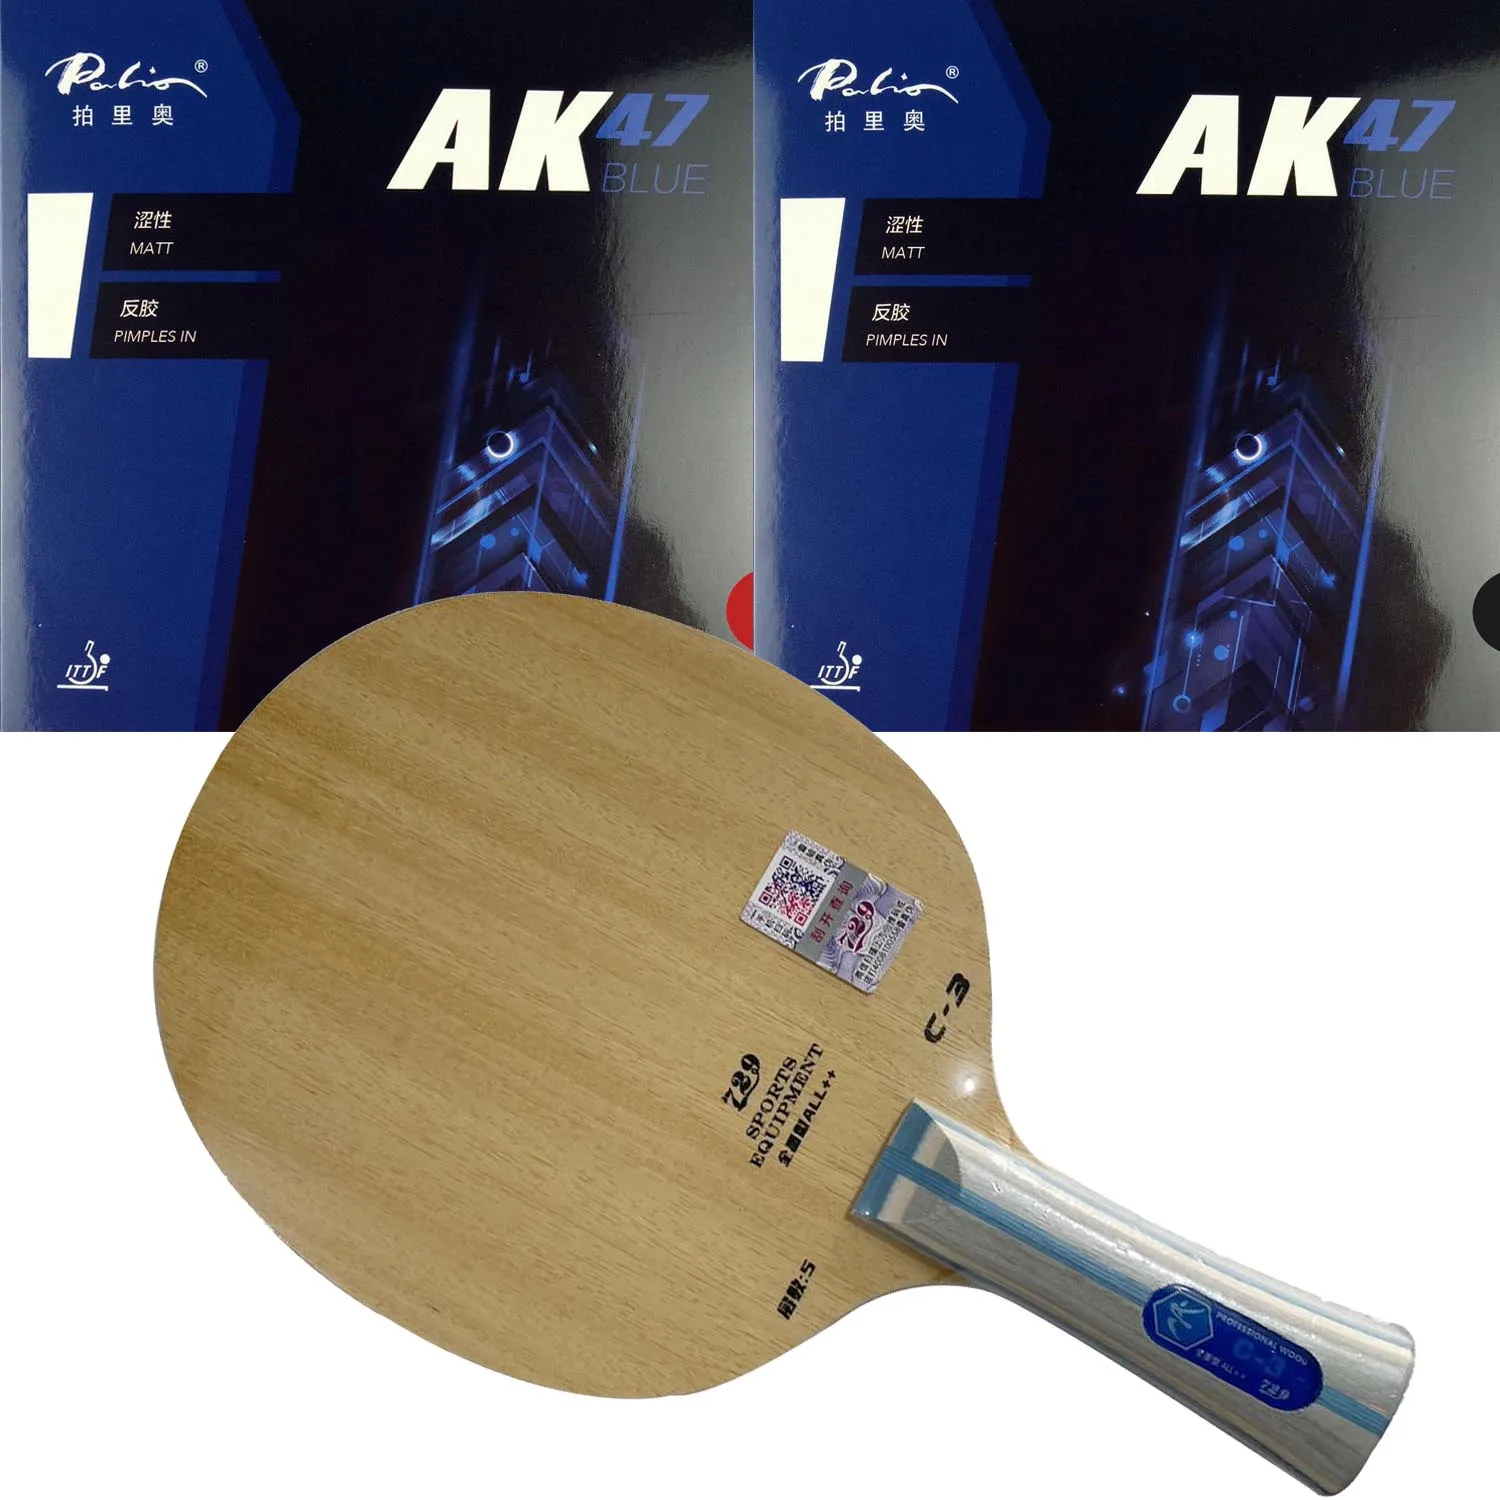 Pro Combo Table Tennis Racket Ping Pong Paddle ALL++ RITC 729 Friendship C-3 Blade with 2x Palio AK47 BLUE Matt Rubbers